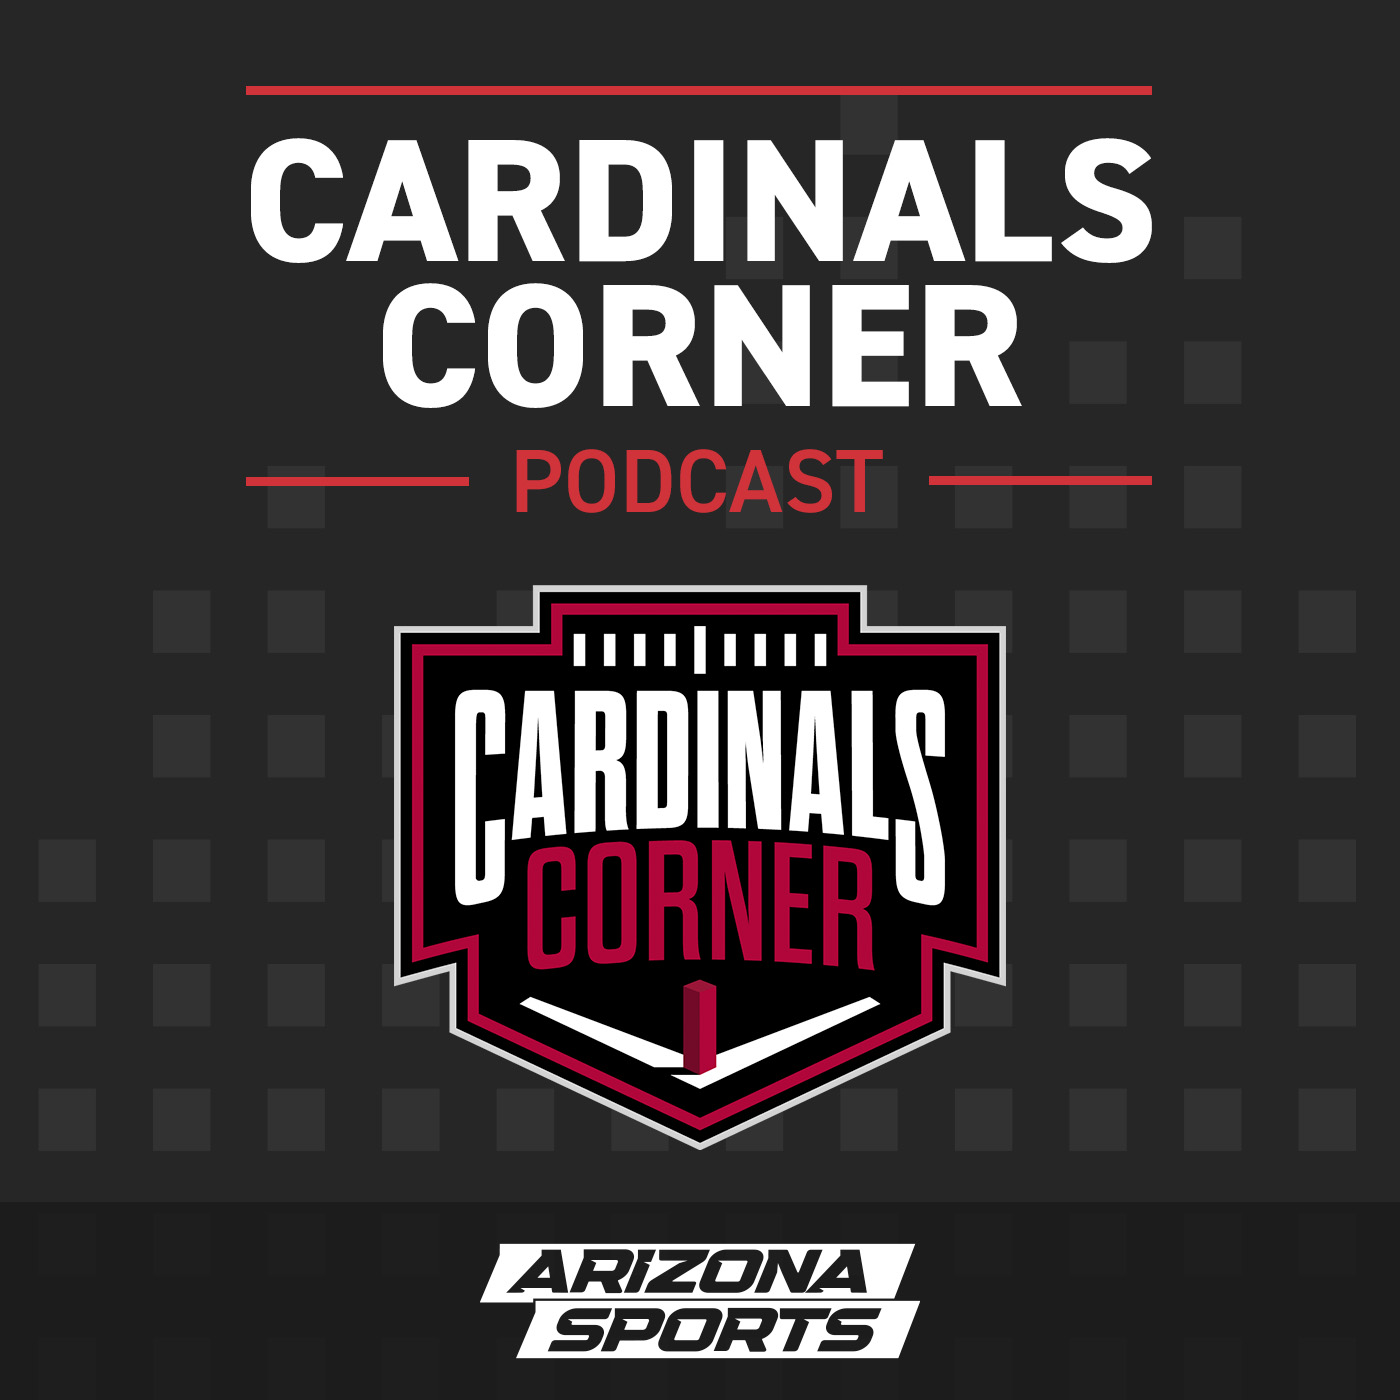 Steve Keim keeps talking about Kyler Murray + training camp preview - July 21